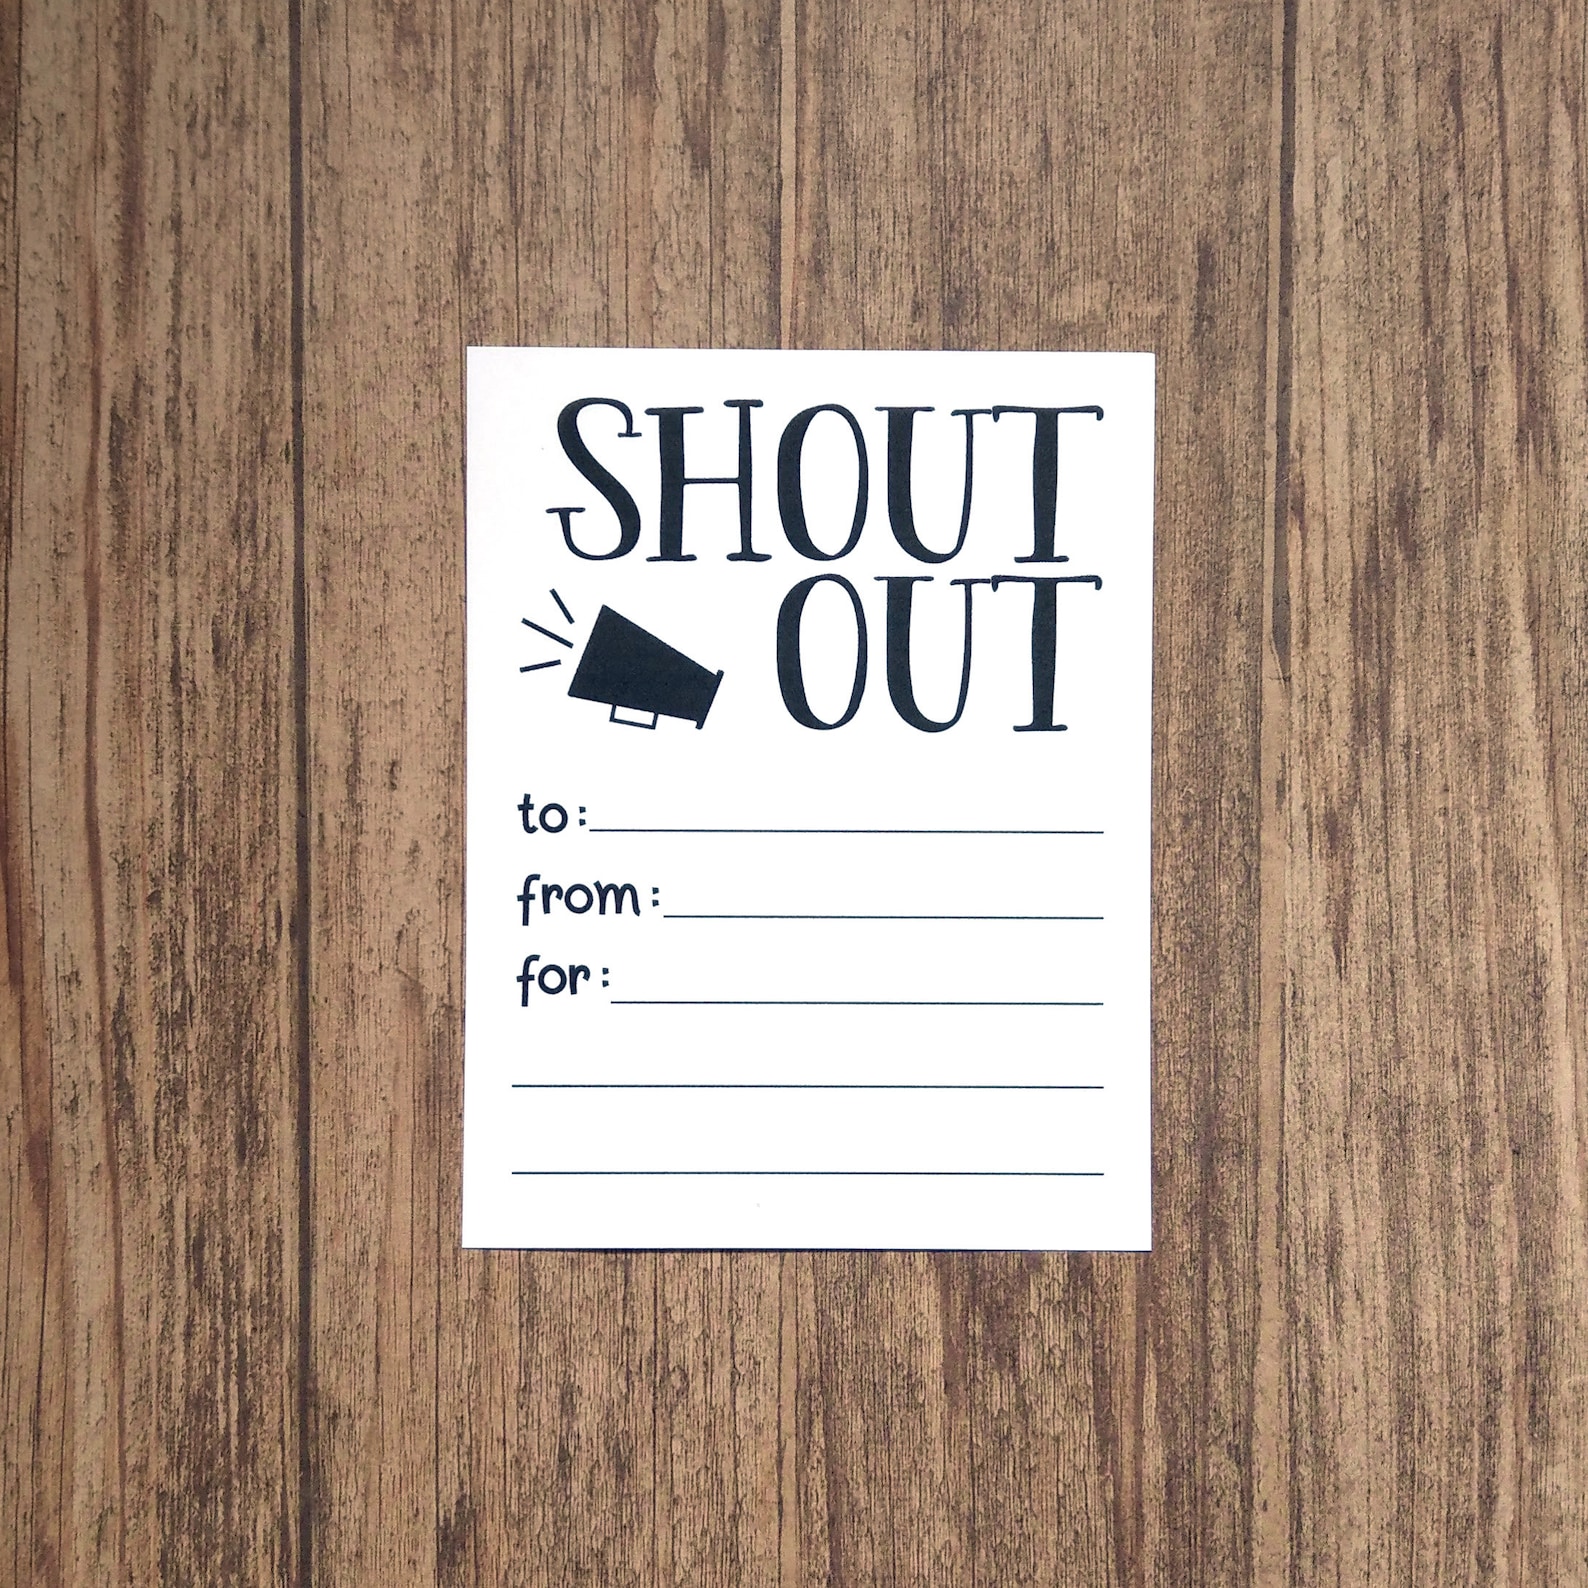 shout-out-cards-printable-pdf-diy-instant-download-8-5-x-etsy